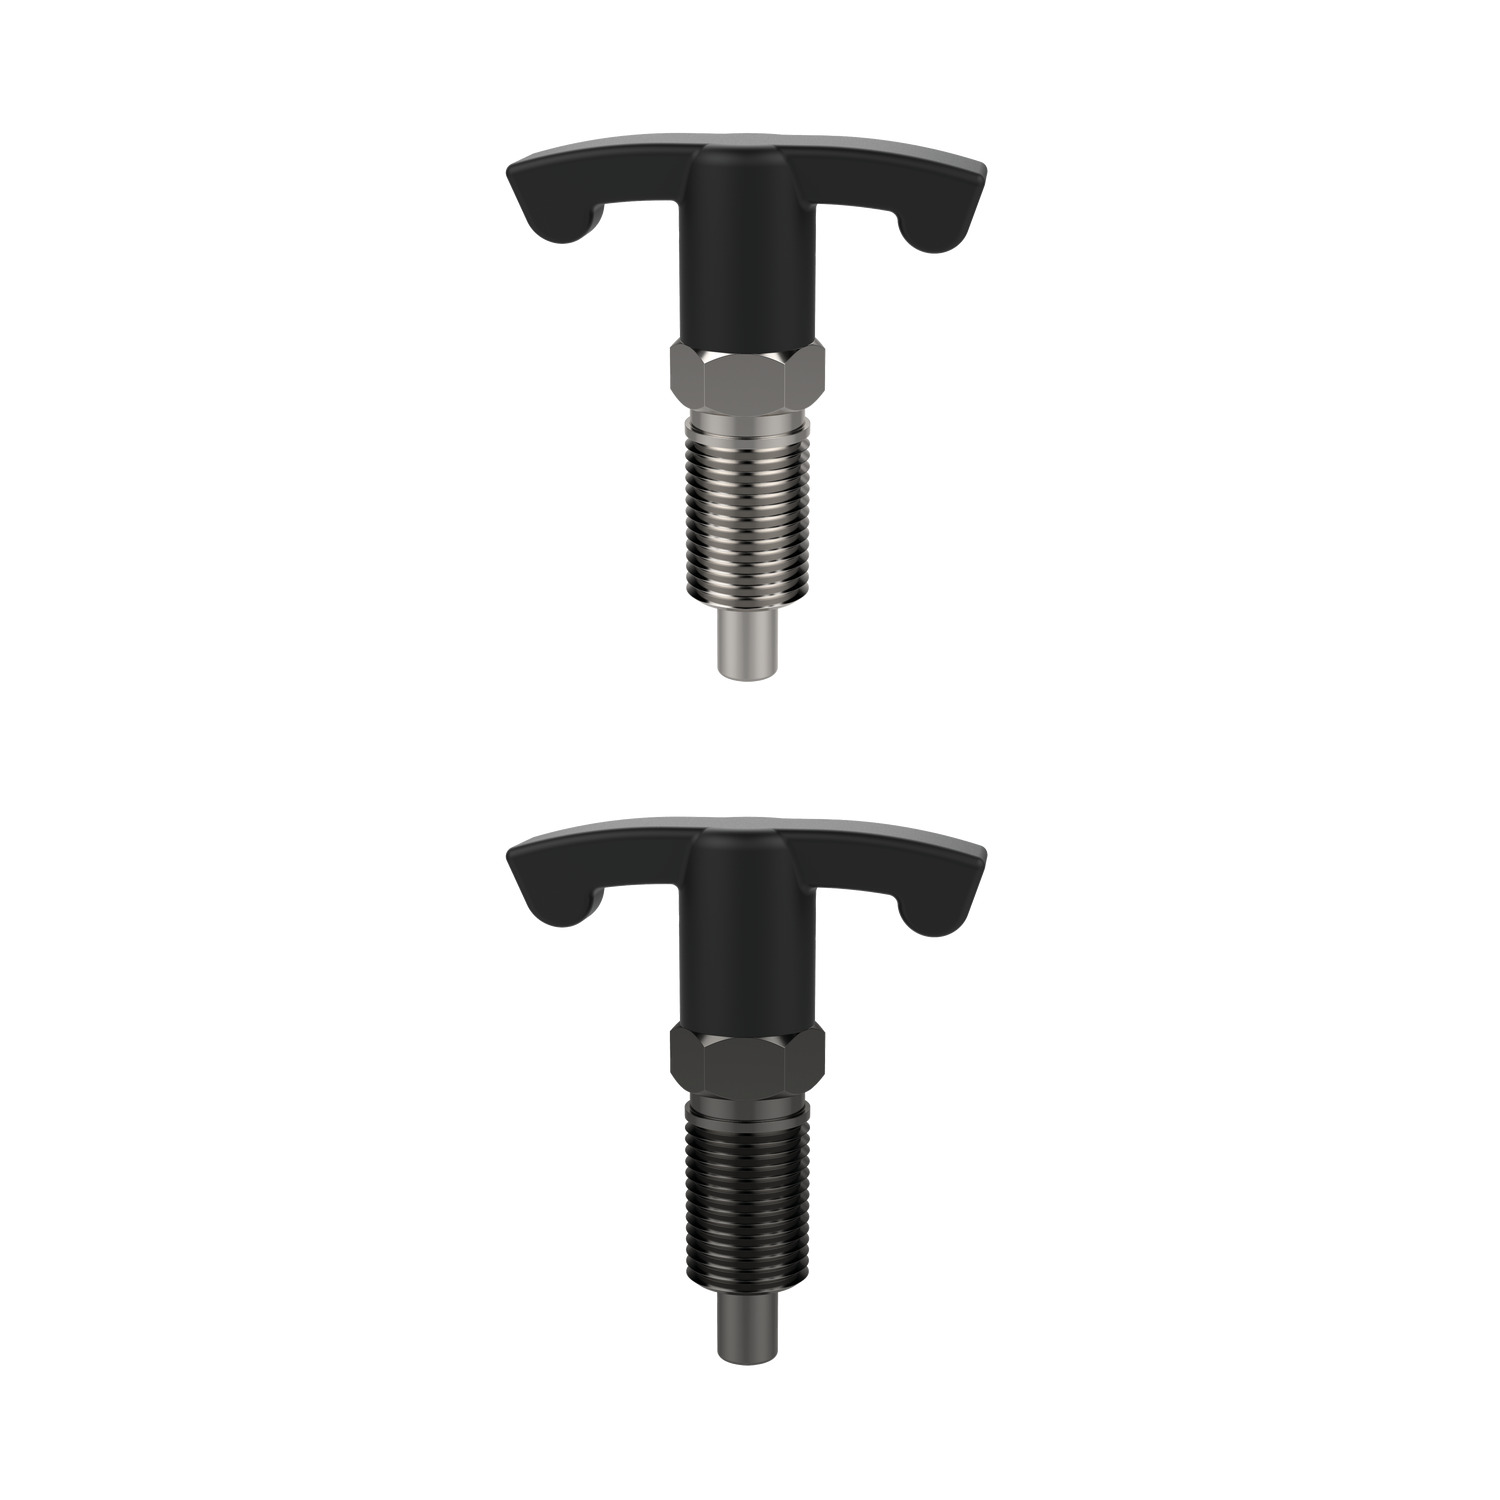 Product 32504, Index Plungers - T-handle Grip compact - locking / 